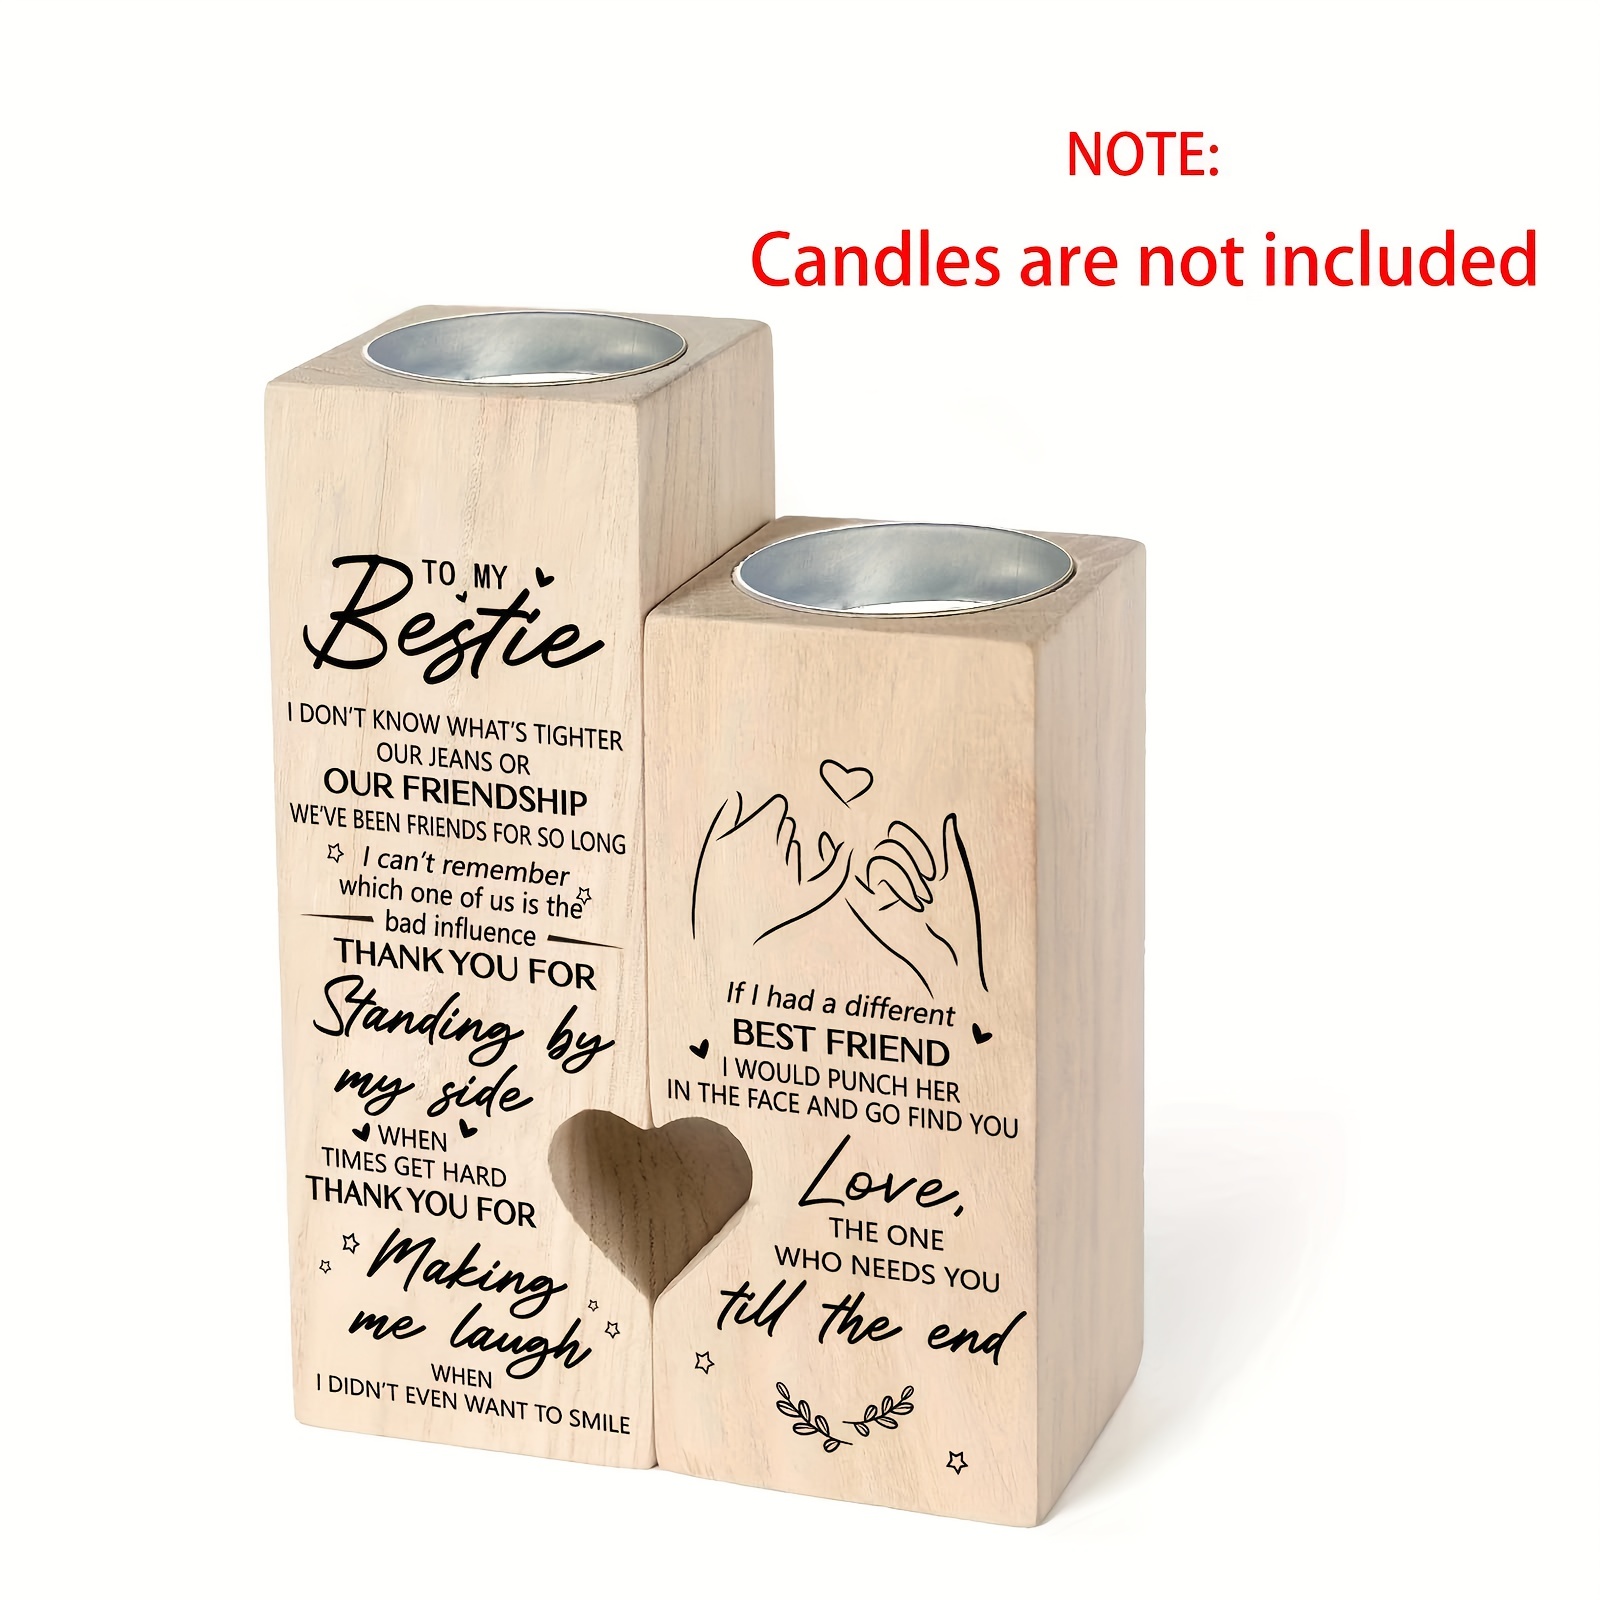 Wood Candle Holders, Heart Shape Candlestick, Gift to My Friend, Romantic Decorative Tealight Holder, Size: 4.7 x 3.5 x 1.8